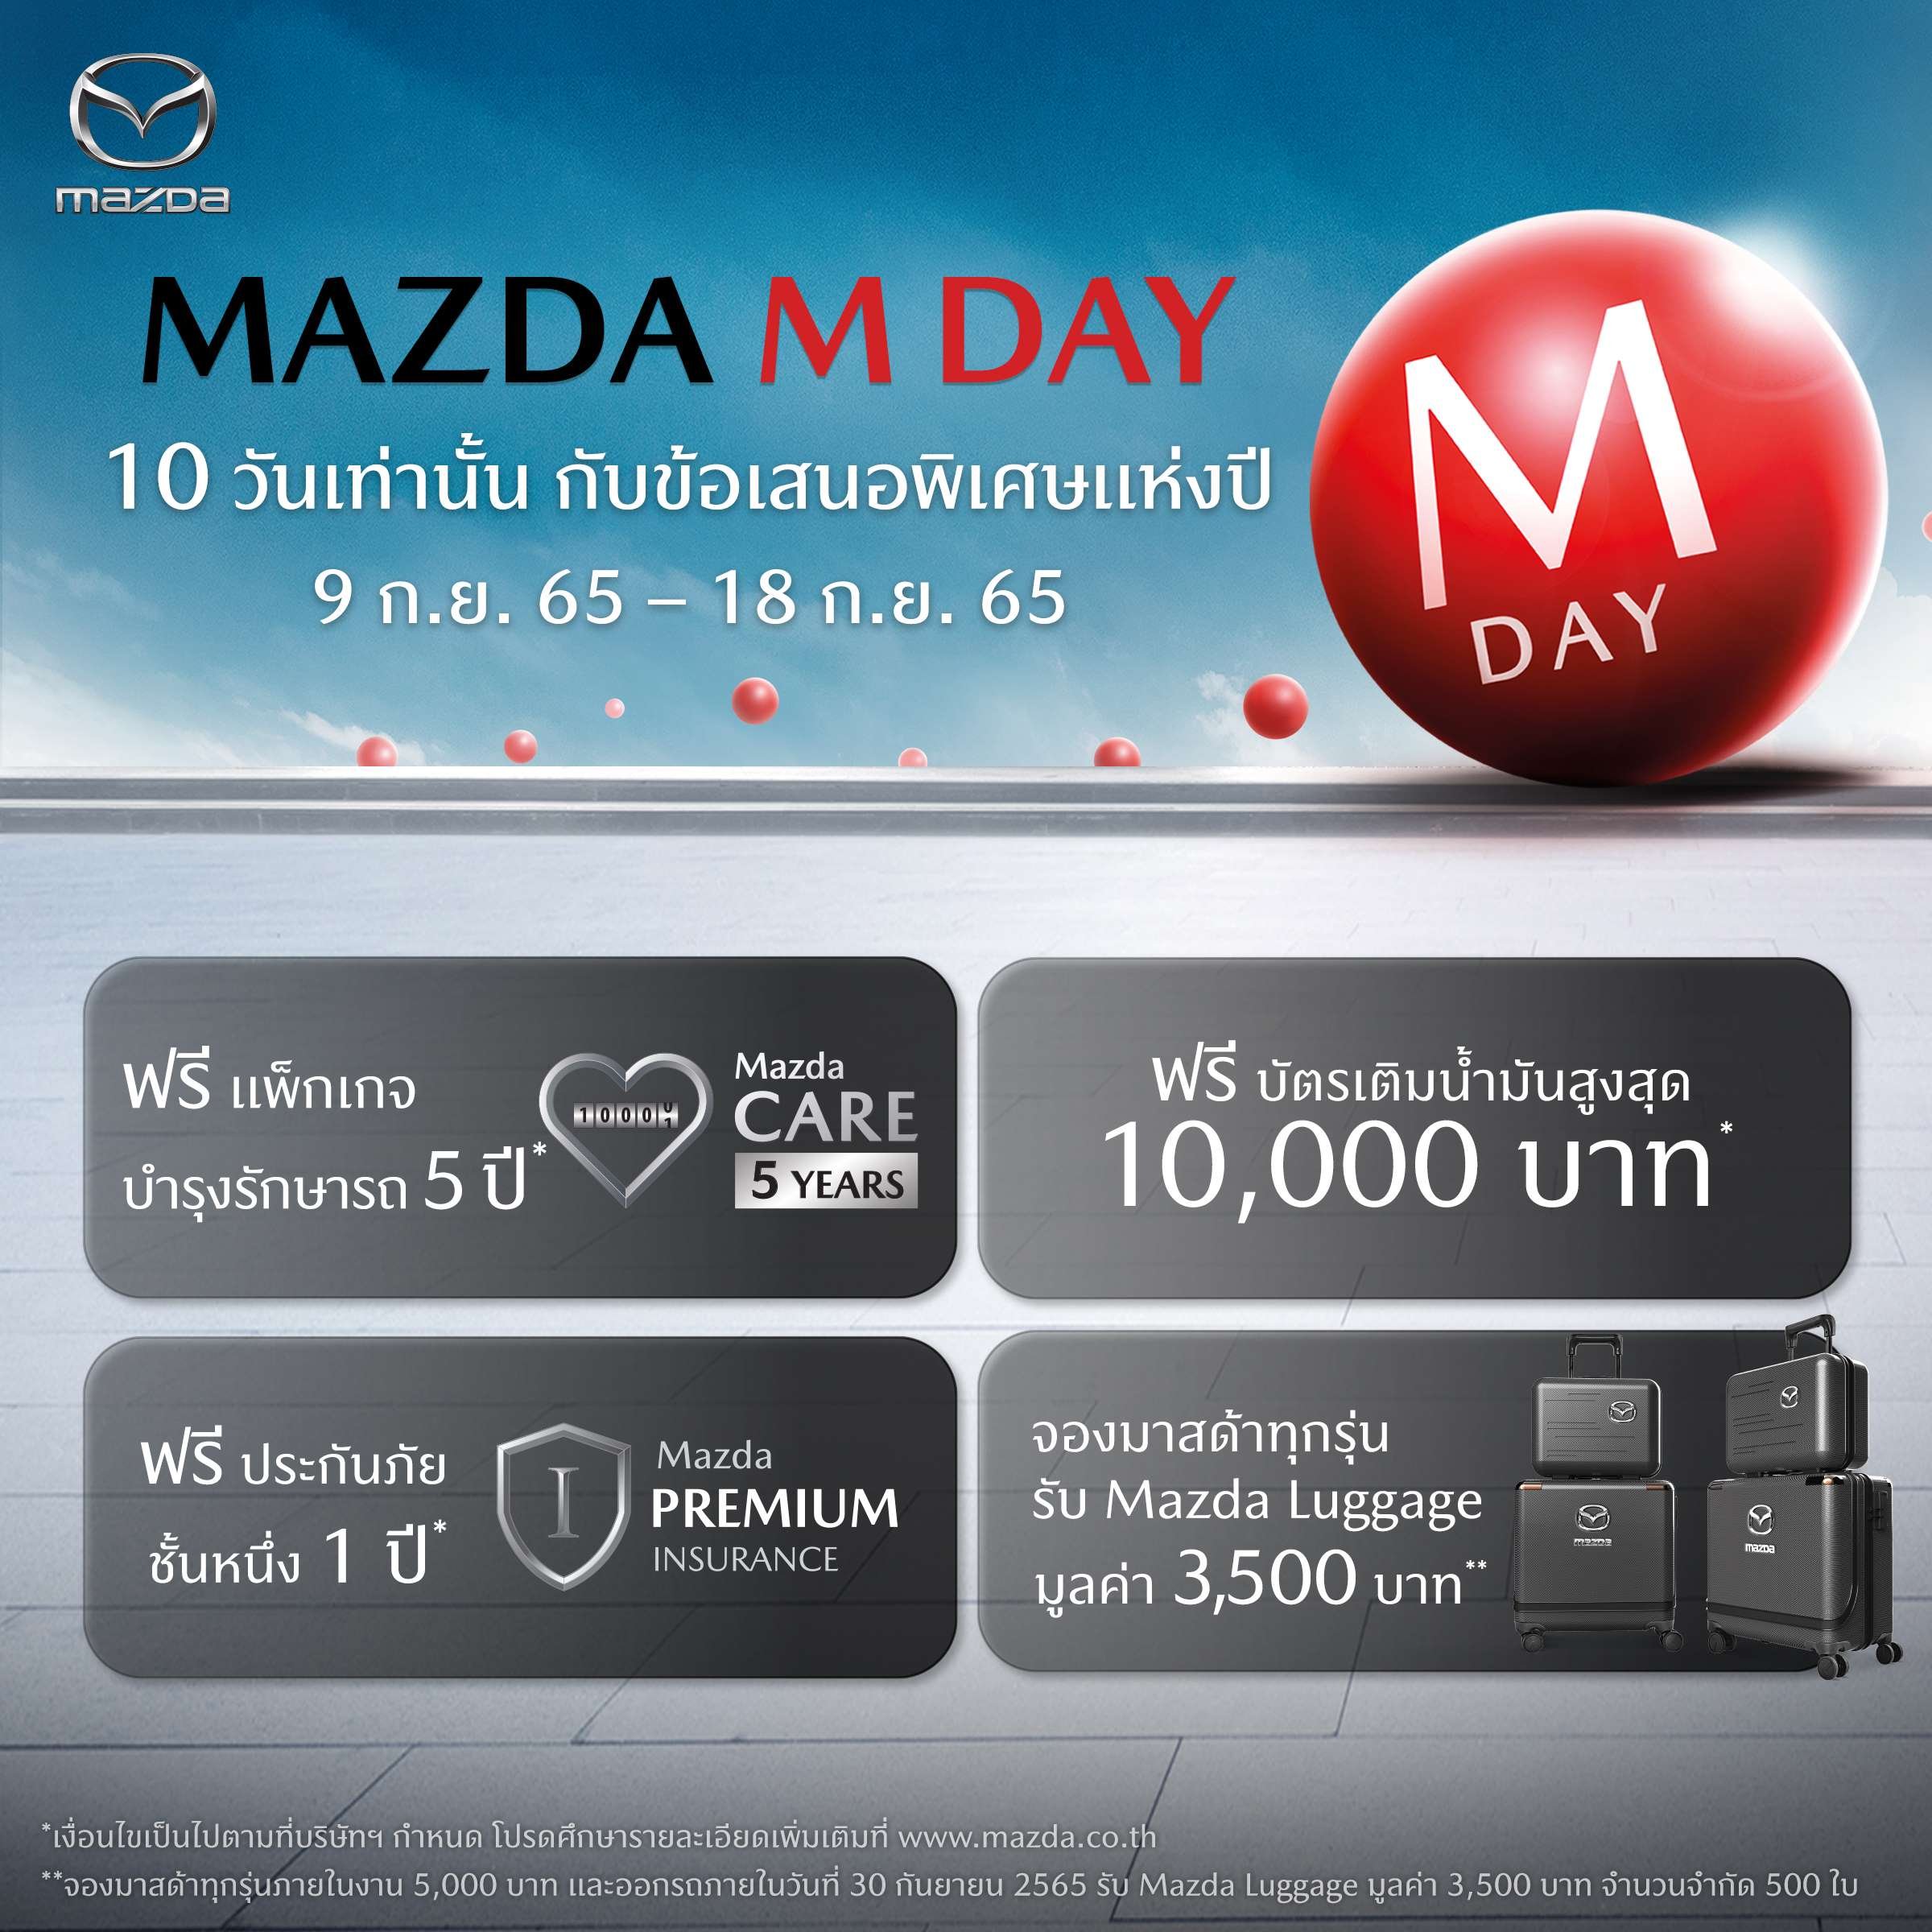 mday-mazdacampaign(002)